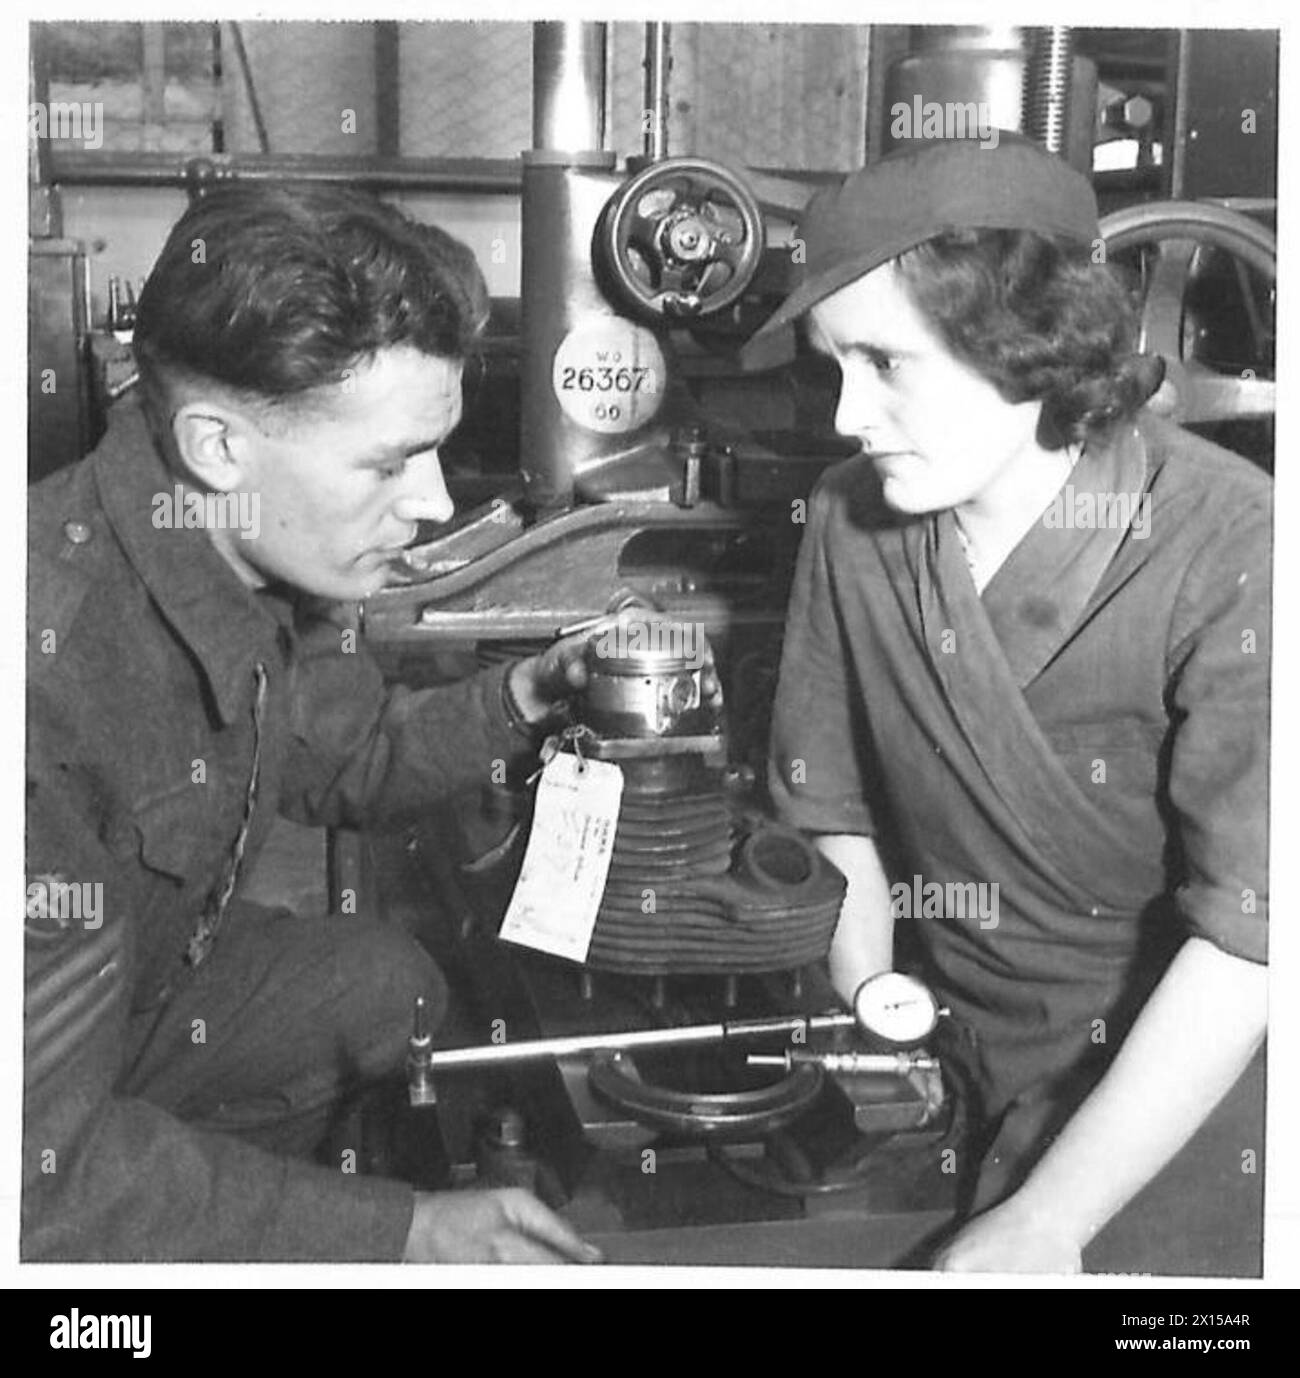 WOMEN HELP SOLDIERS IN REME WORKSHOP - Mrs. Jessie Plumb of Luton operates a Thomsen boring machine, reboring motor cycle cylinders. Mrs. Plumb is seen here with a Staff Sergeant examining a cylinder she has rebored British Army Stock Photo